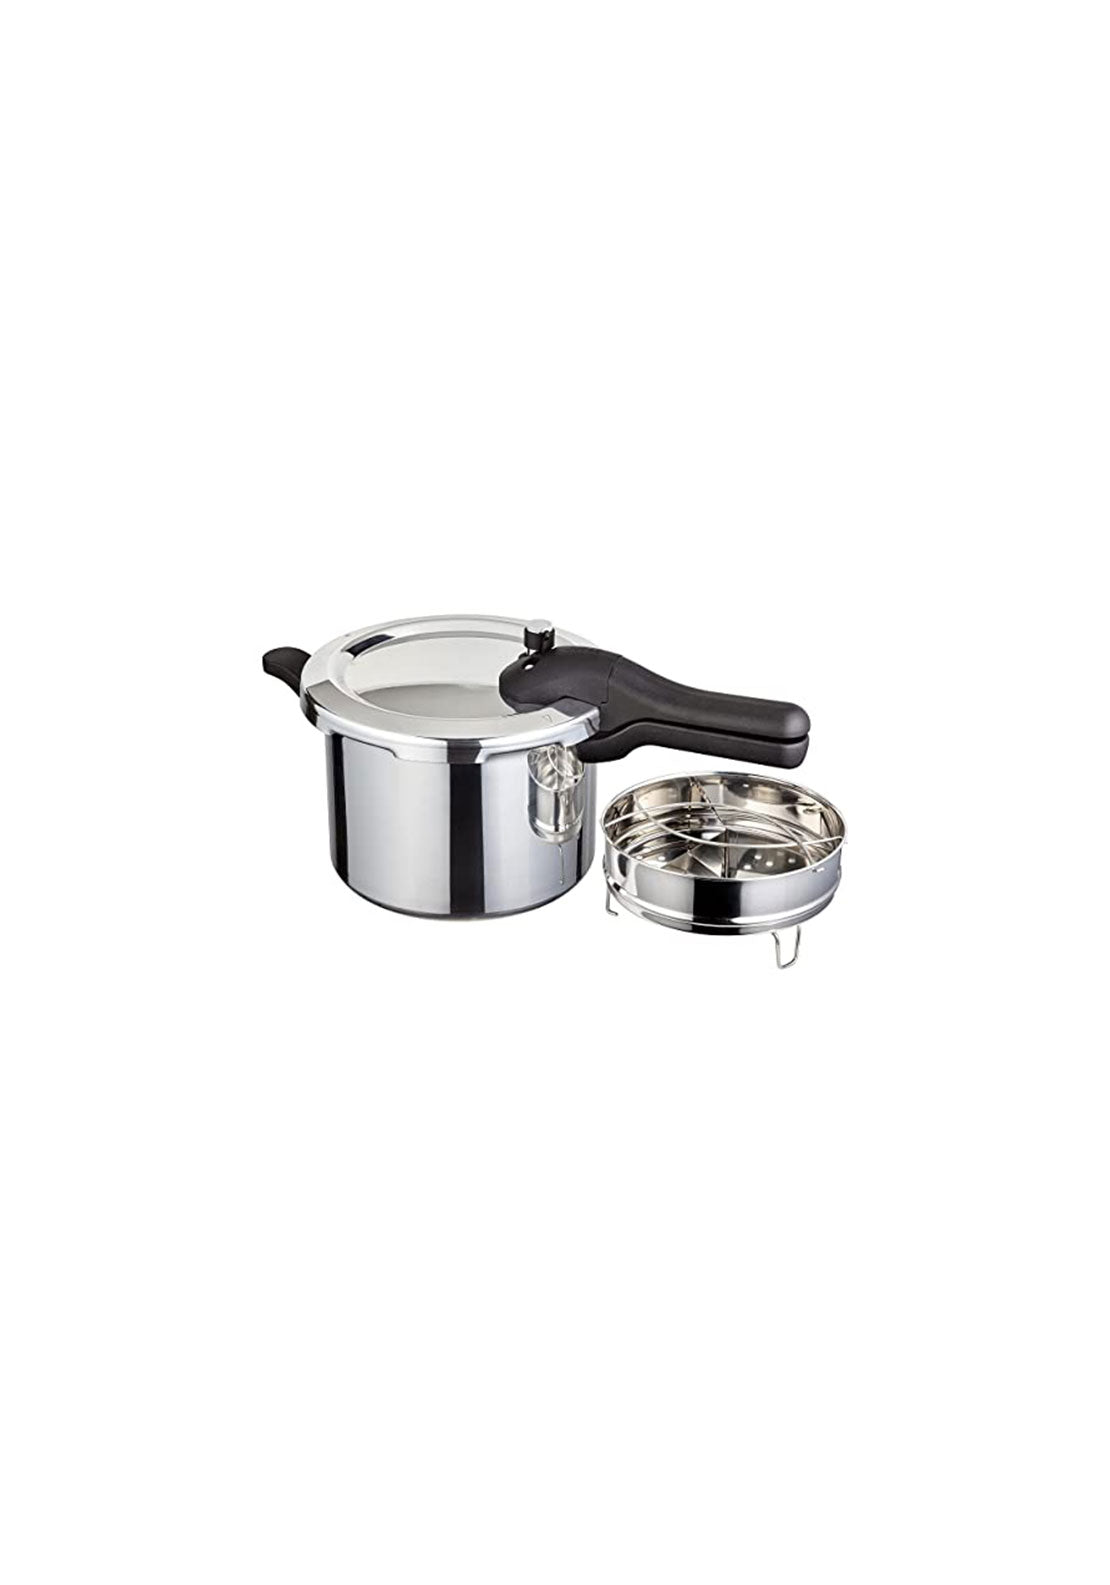 Judge Judge Everyday Cookware | JDAY79 1 Shaws Department Stores